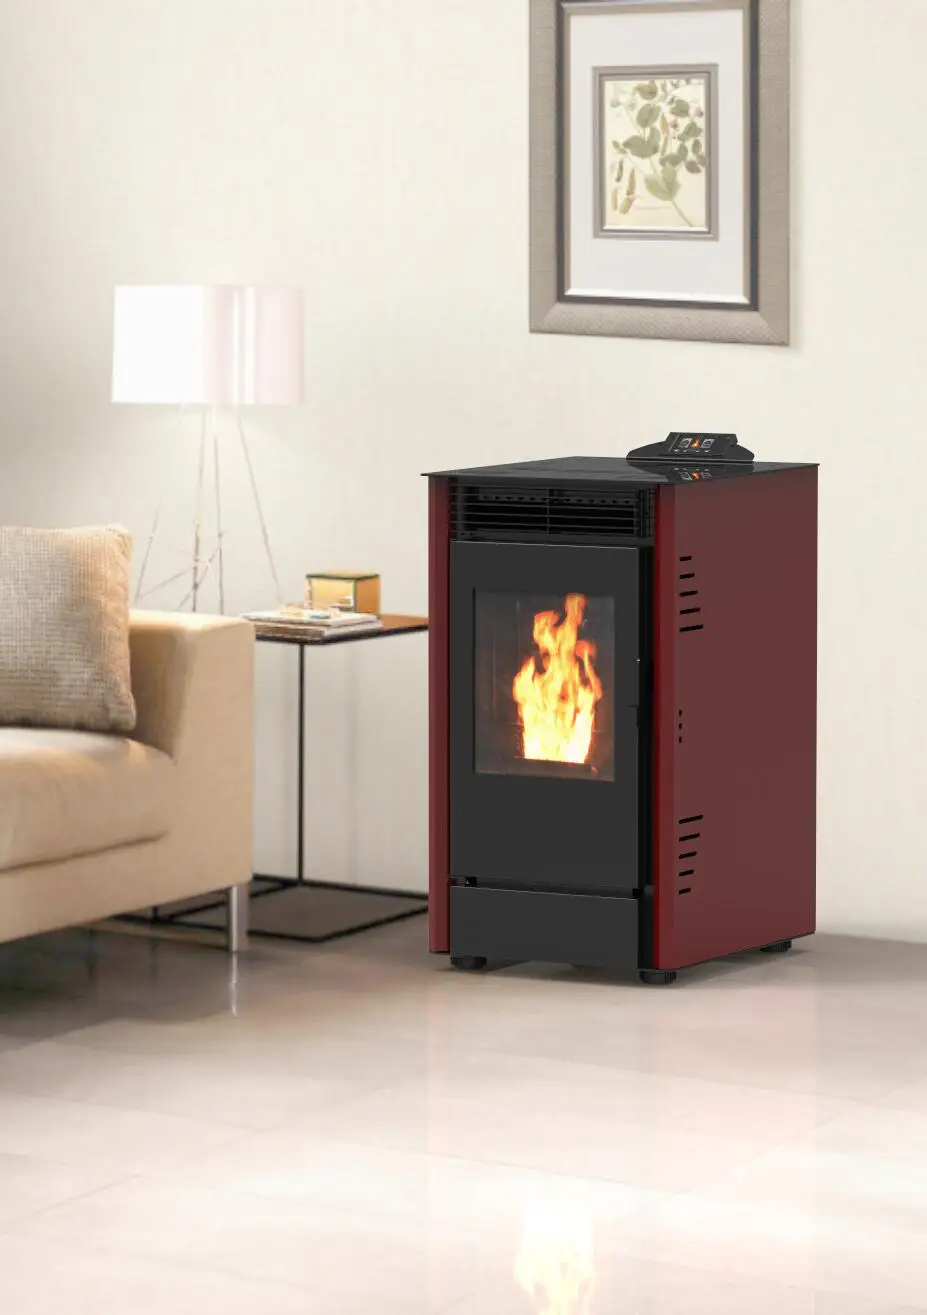 PINCHENG 7.5KW fireplaces & stoves smokeless charcoal stove fireplace electric